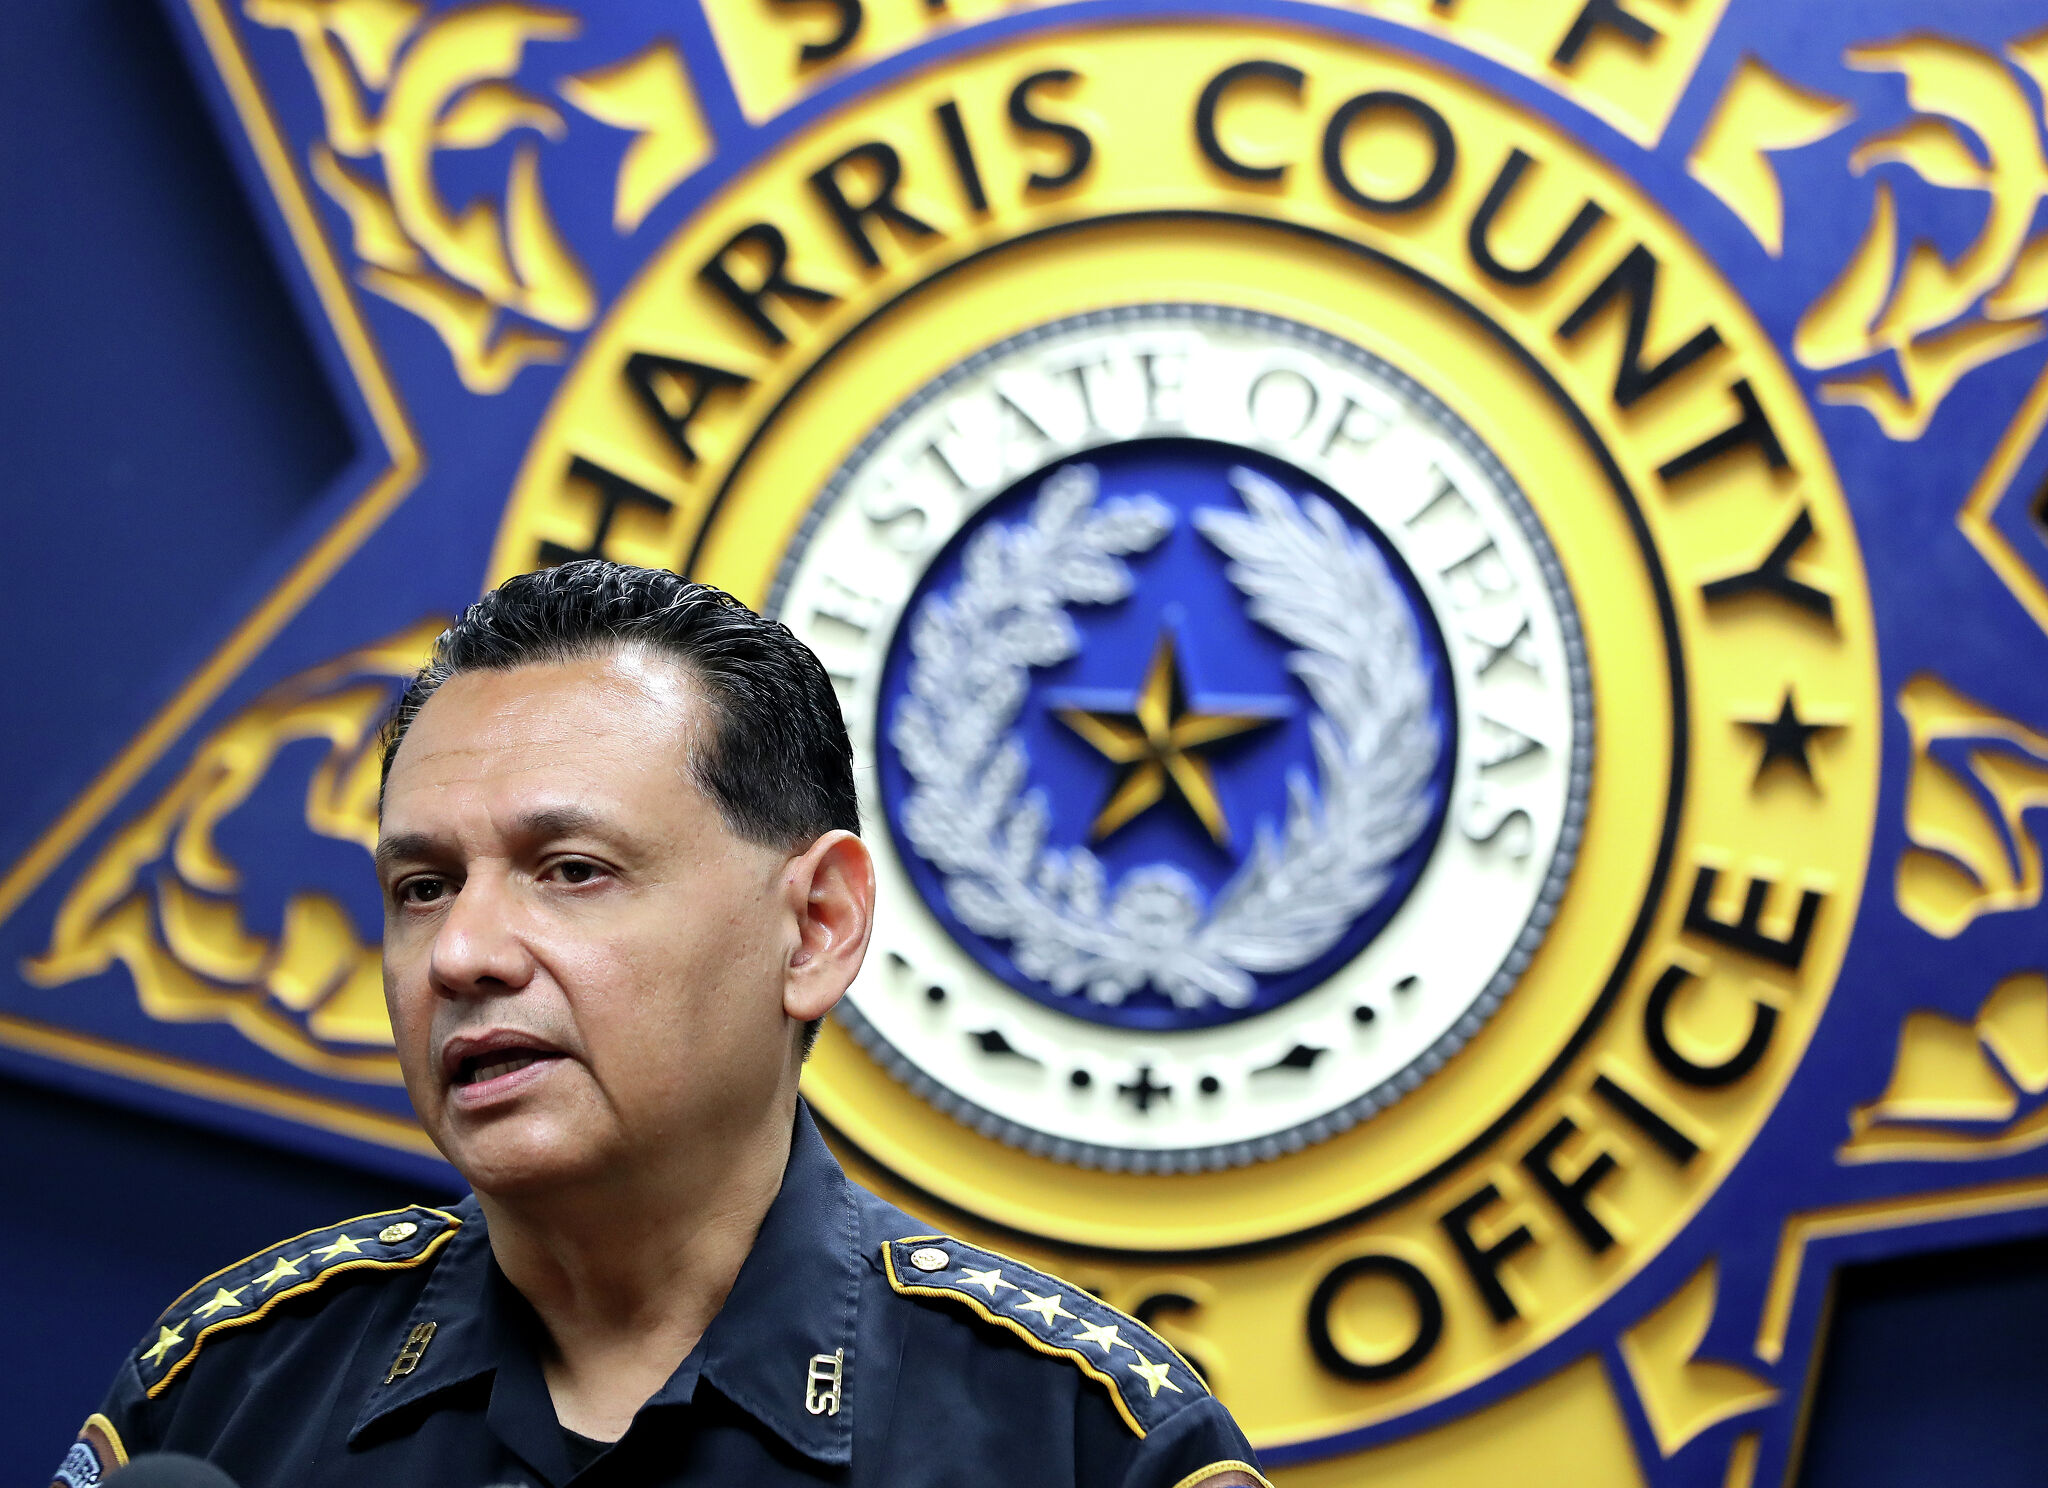 Harris County Sheriffs Office Sued After Alleged Beating